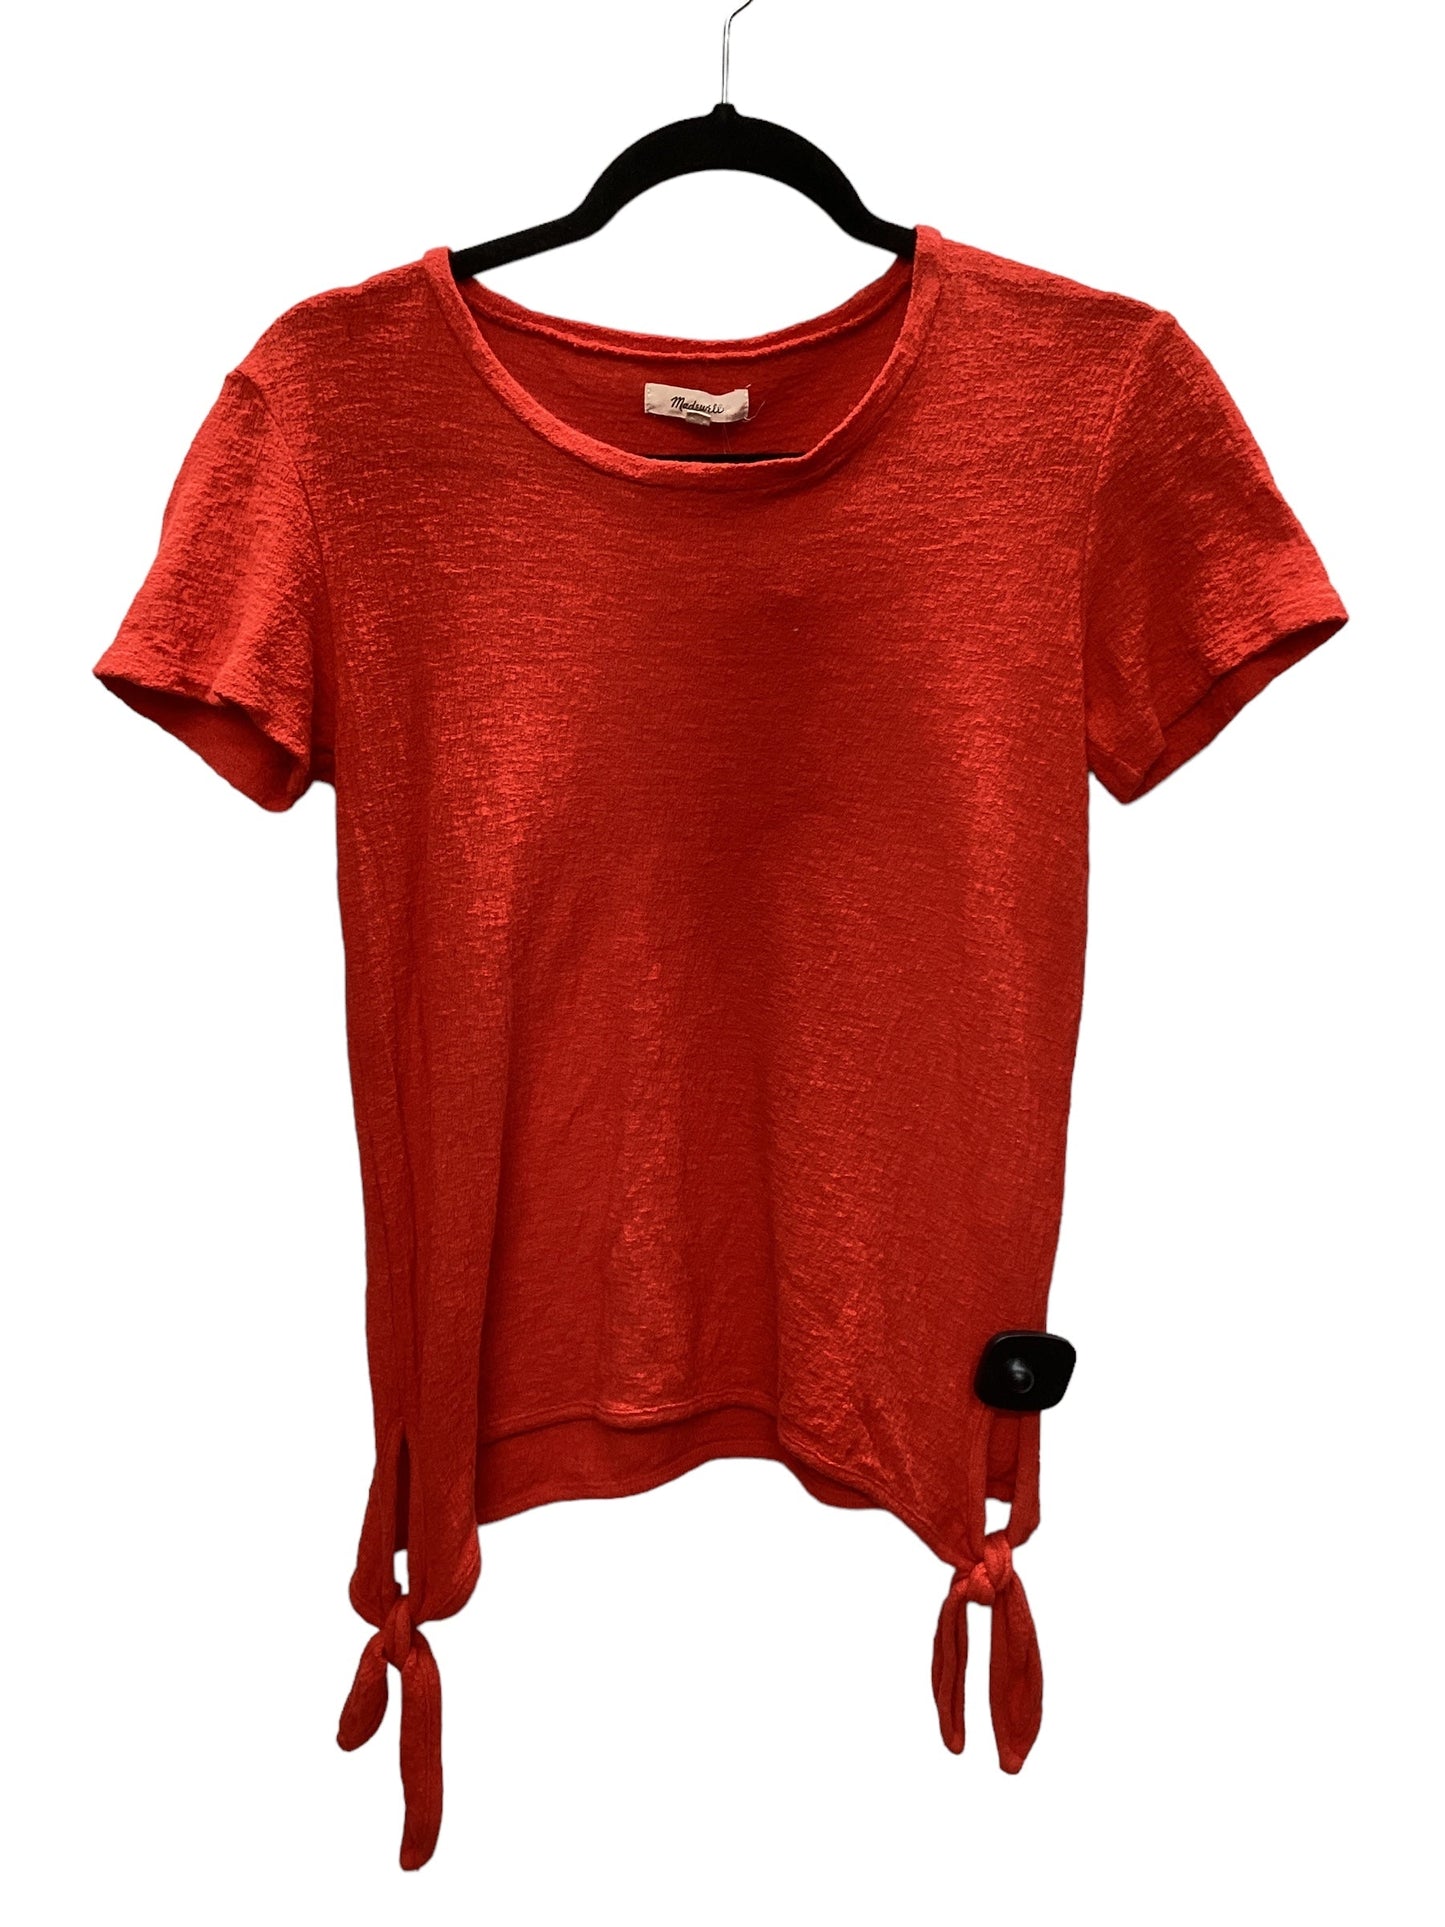 Red Top Short Sleeve Madewell, Size Xs